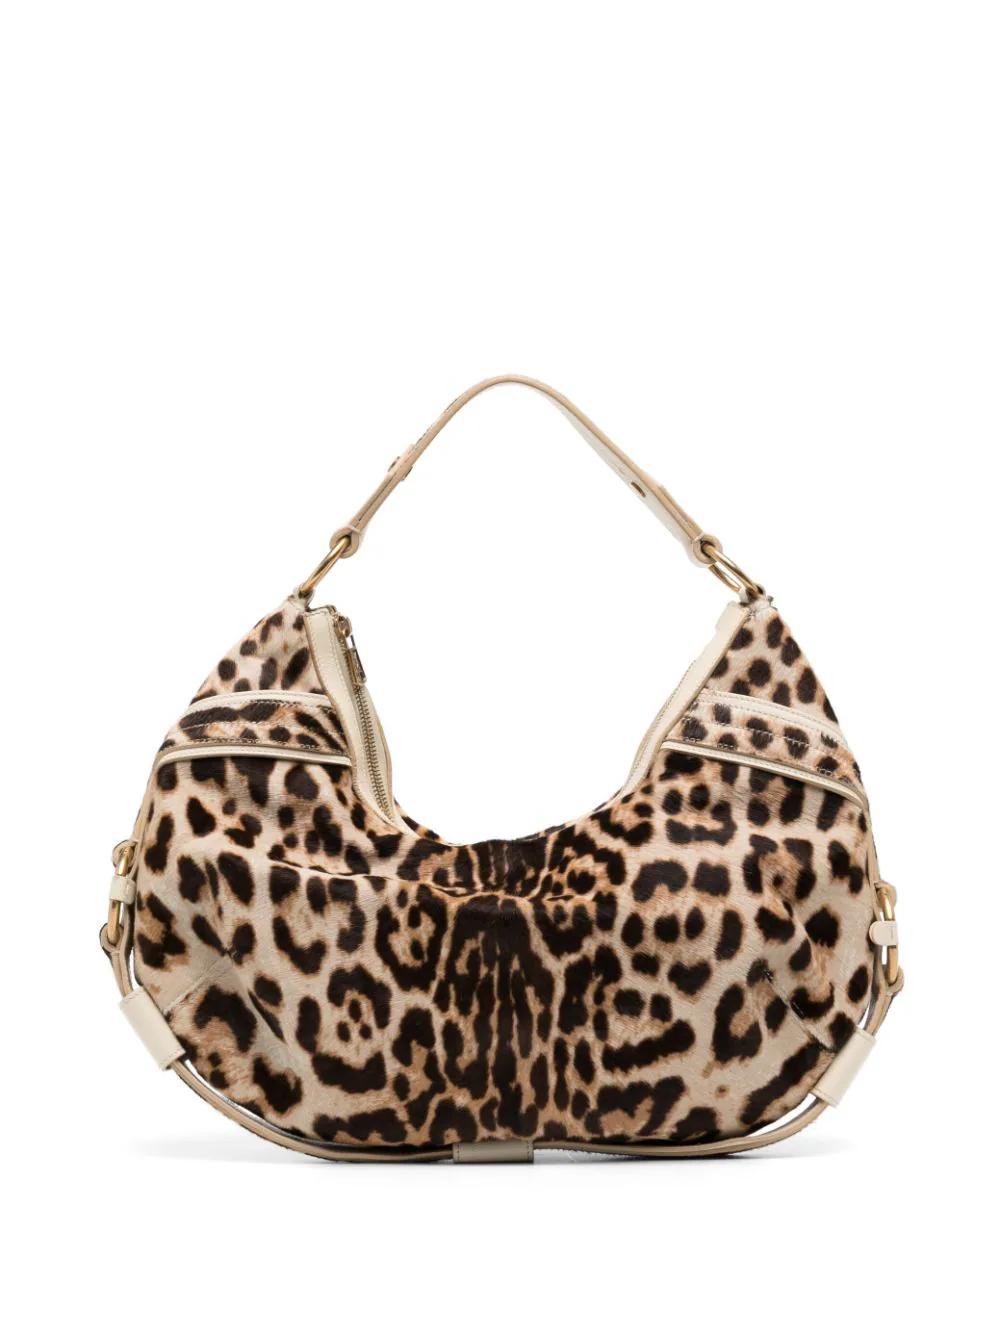 Saint Laurent Leopard Print Hobo Bag In Excellent Condition For Sale In London, GB